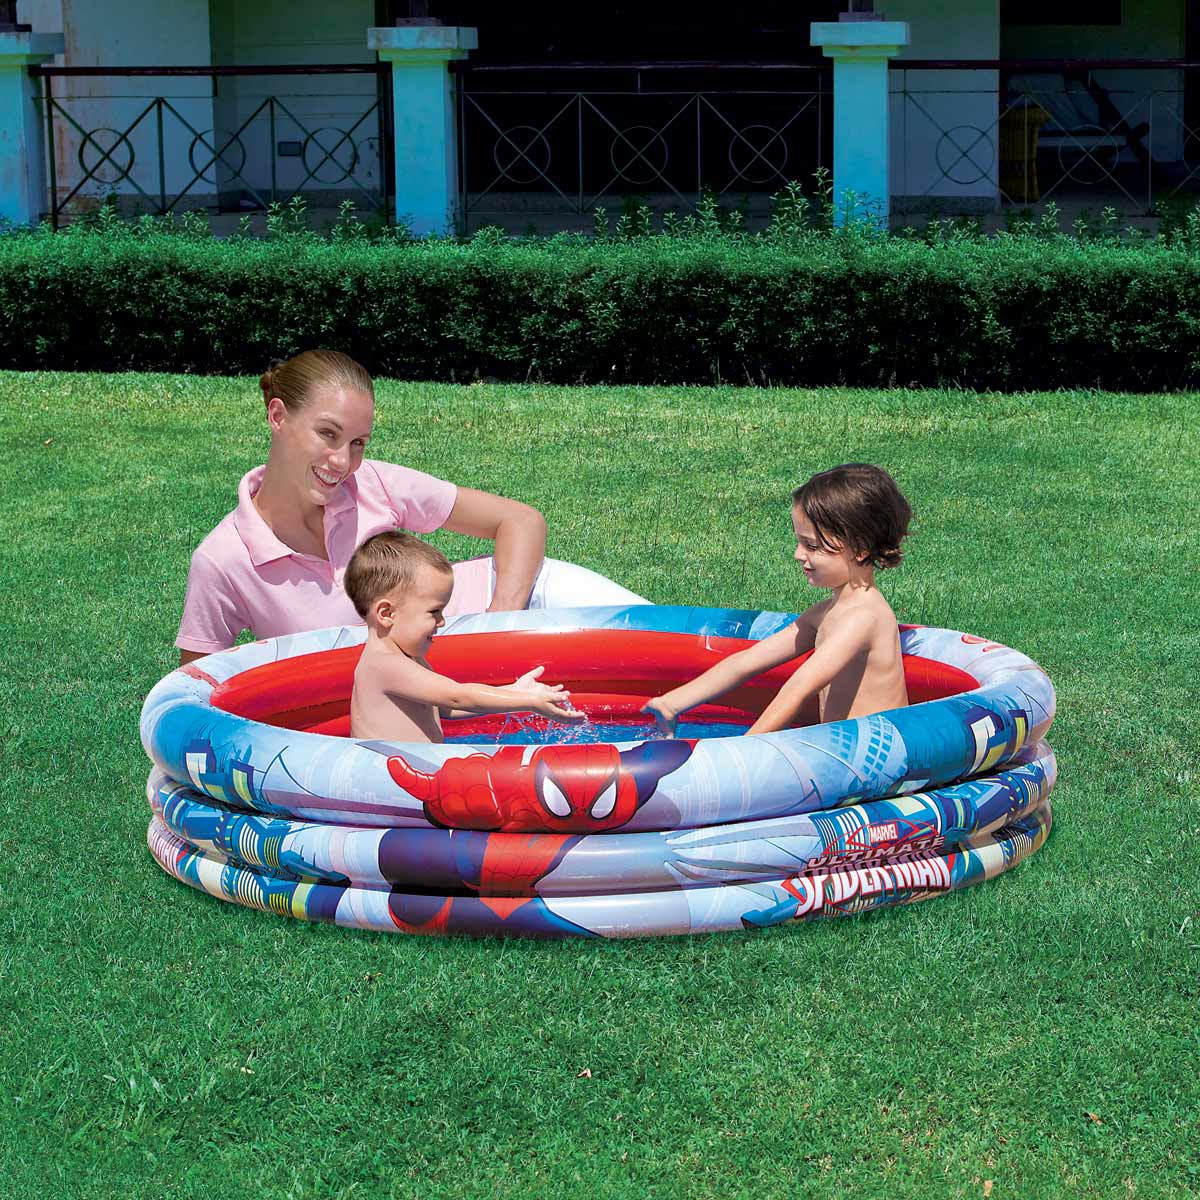 60x12 3-Ring Pool - Inflatable pool